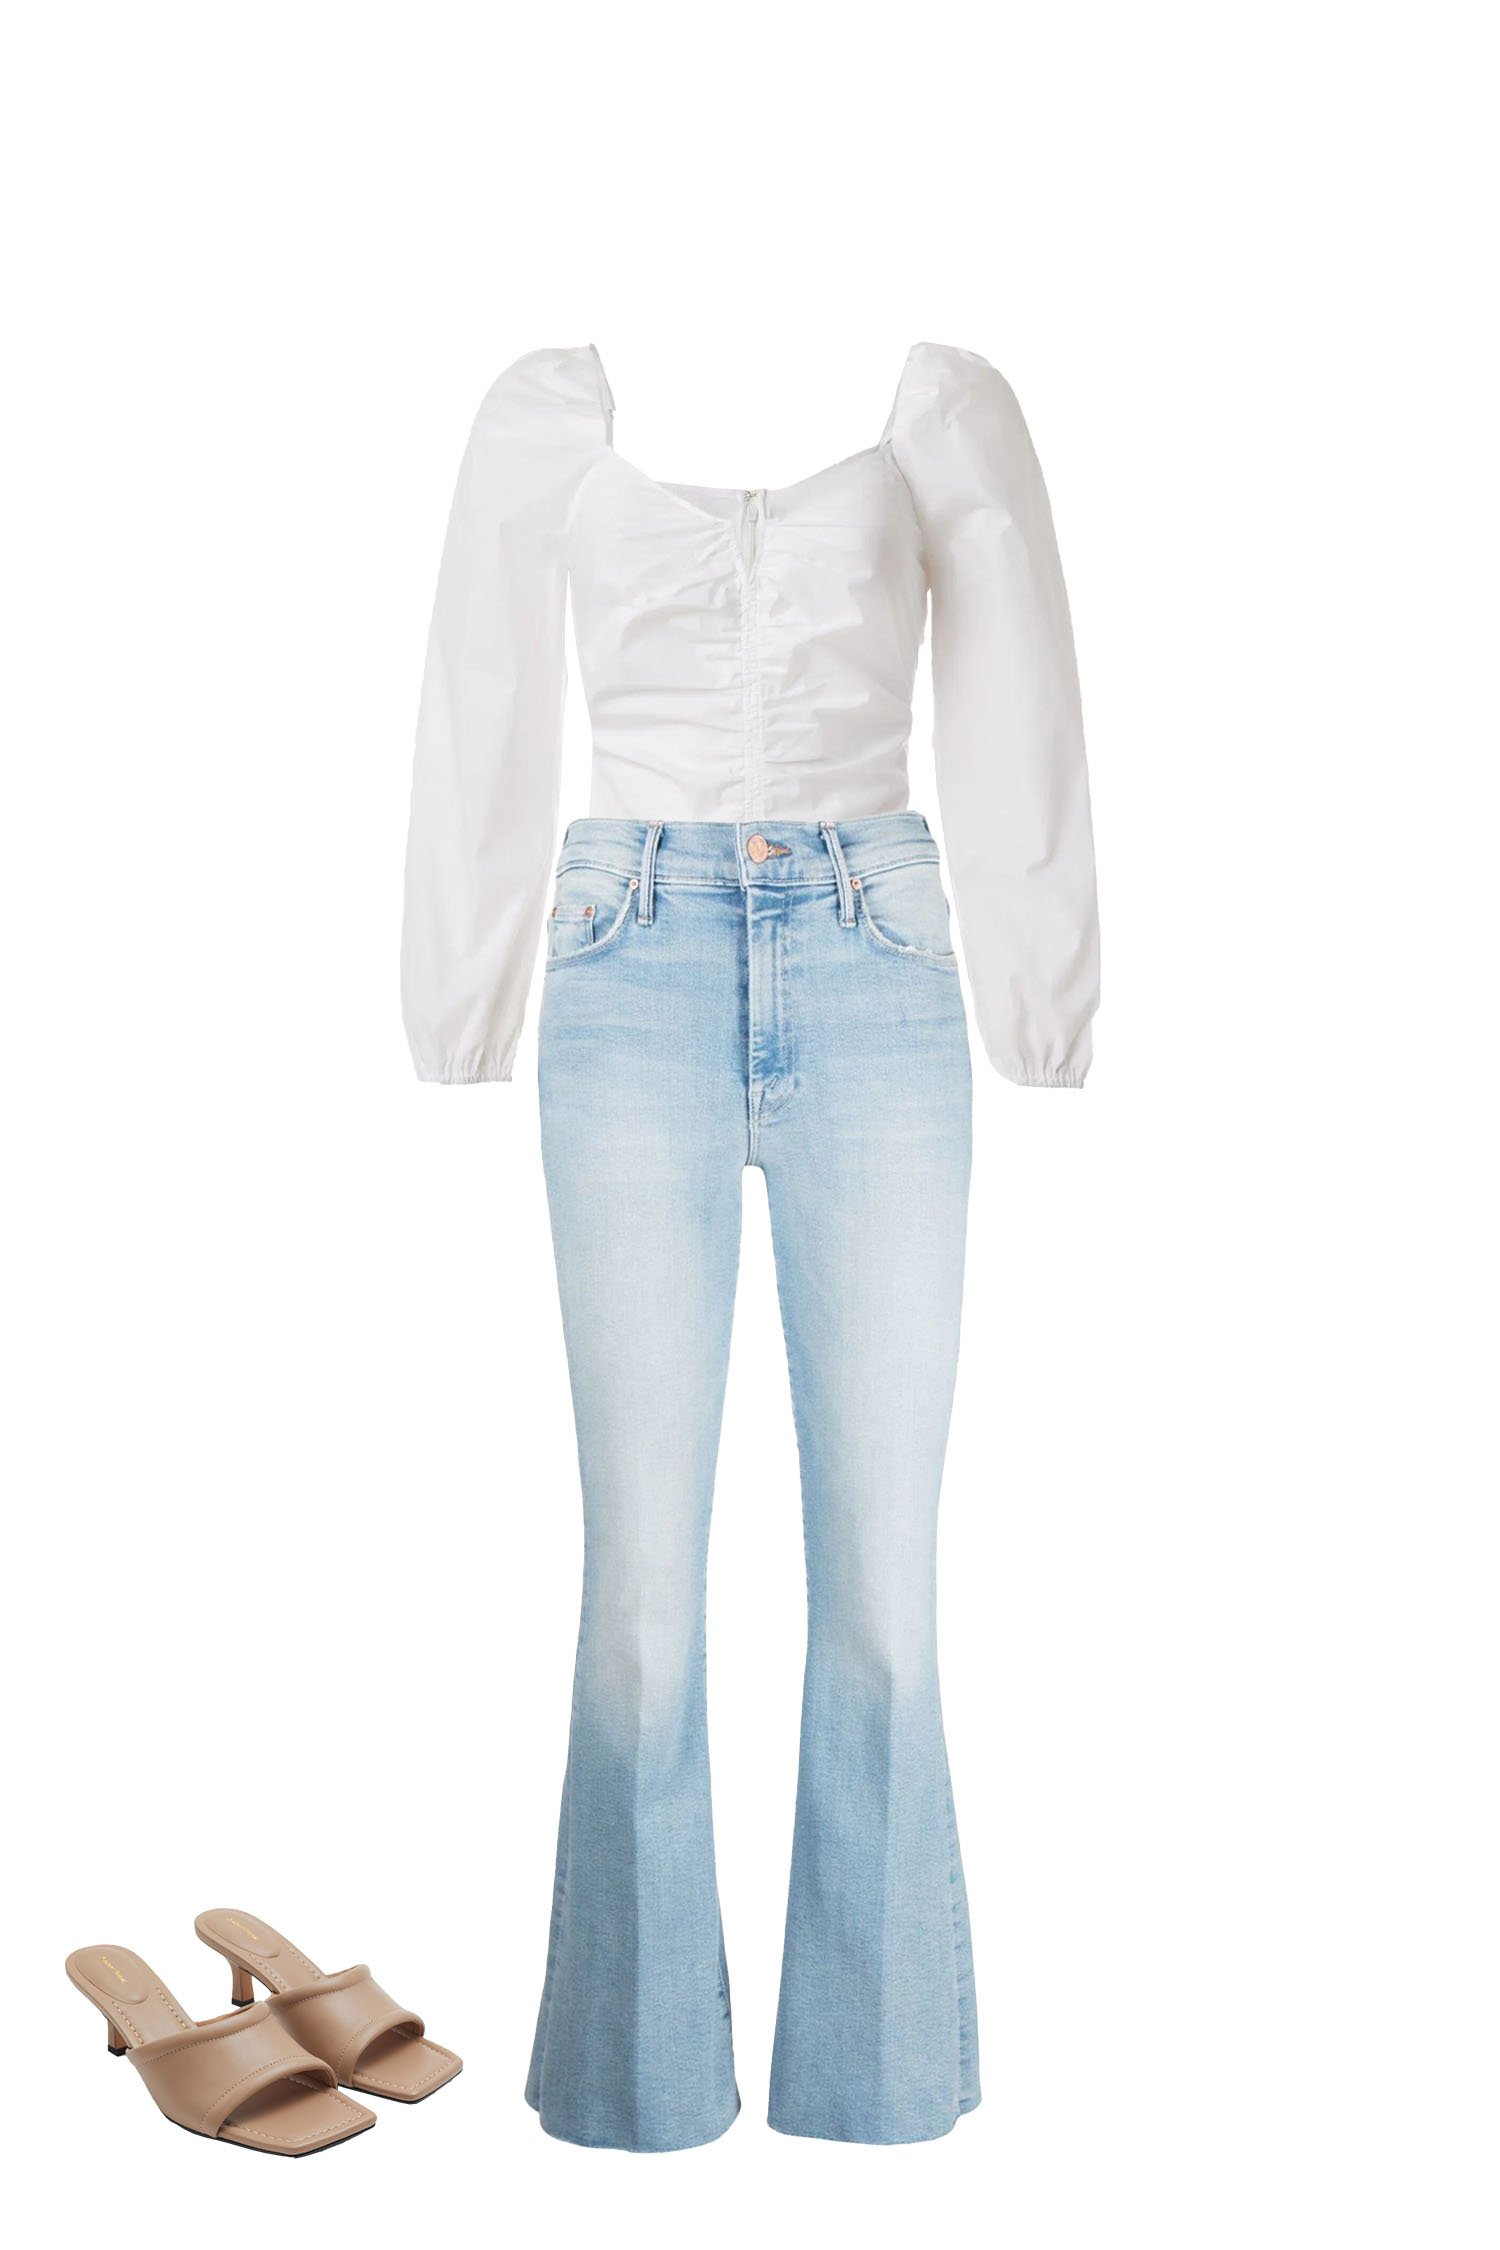 Pair Light Blue Flare Jeans with a White Sweetheart Neckline Blouse, and Beige Square Toe Kitten Heel Sandals